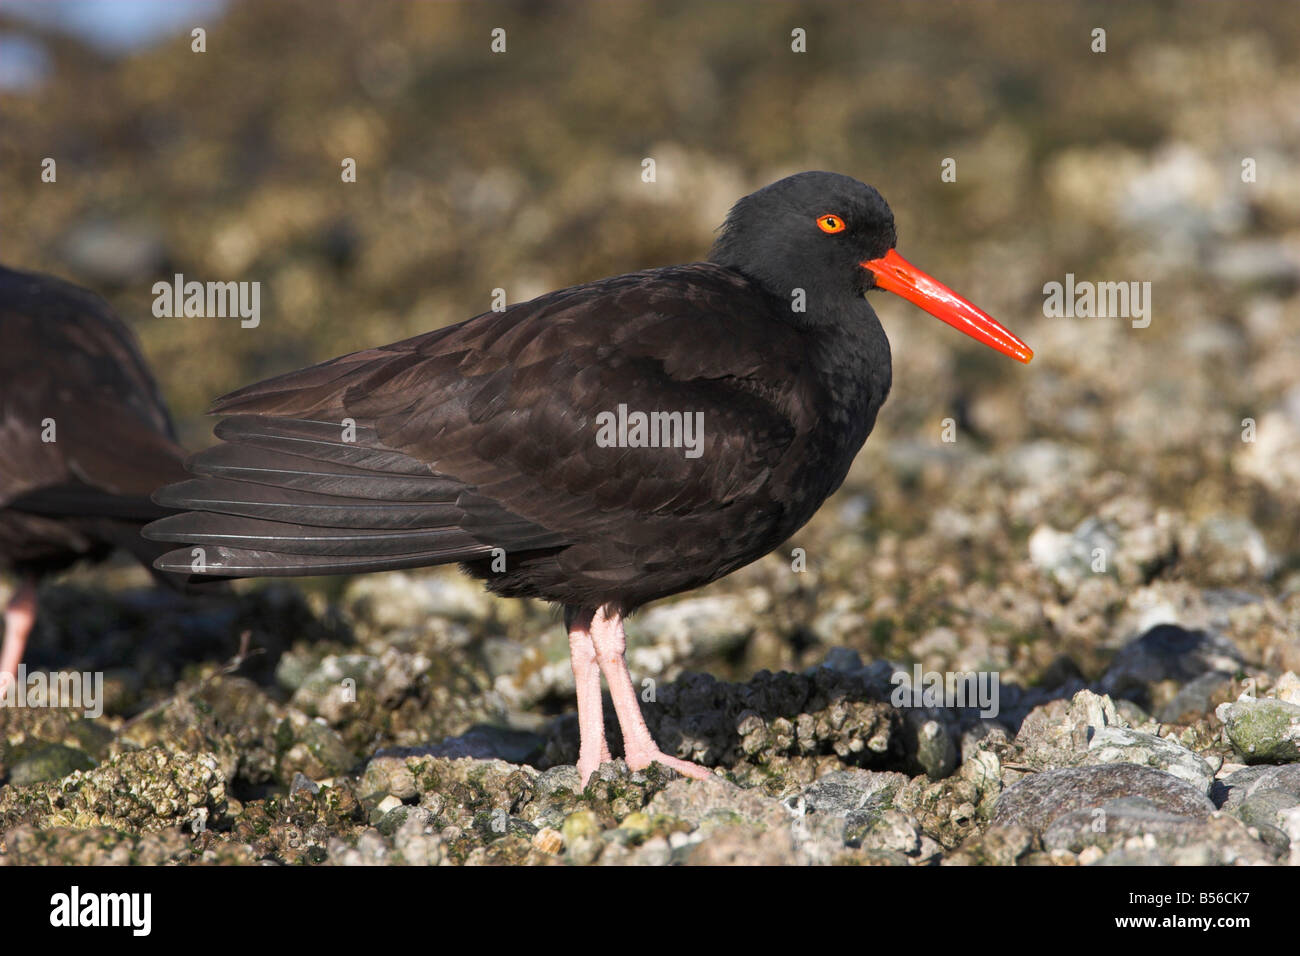 Black Oystercatcher Haematopus bachmani foraging on pebbly beach in search of food at Oak Bay Victoria Vancouver Island in Feb. Stock Photo